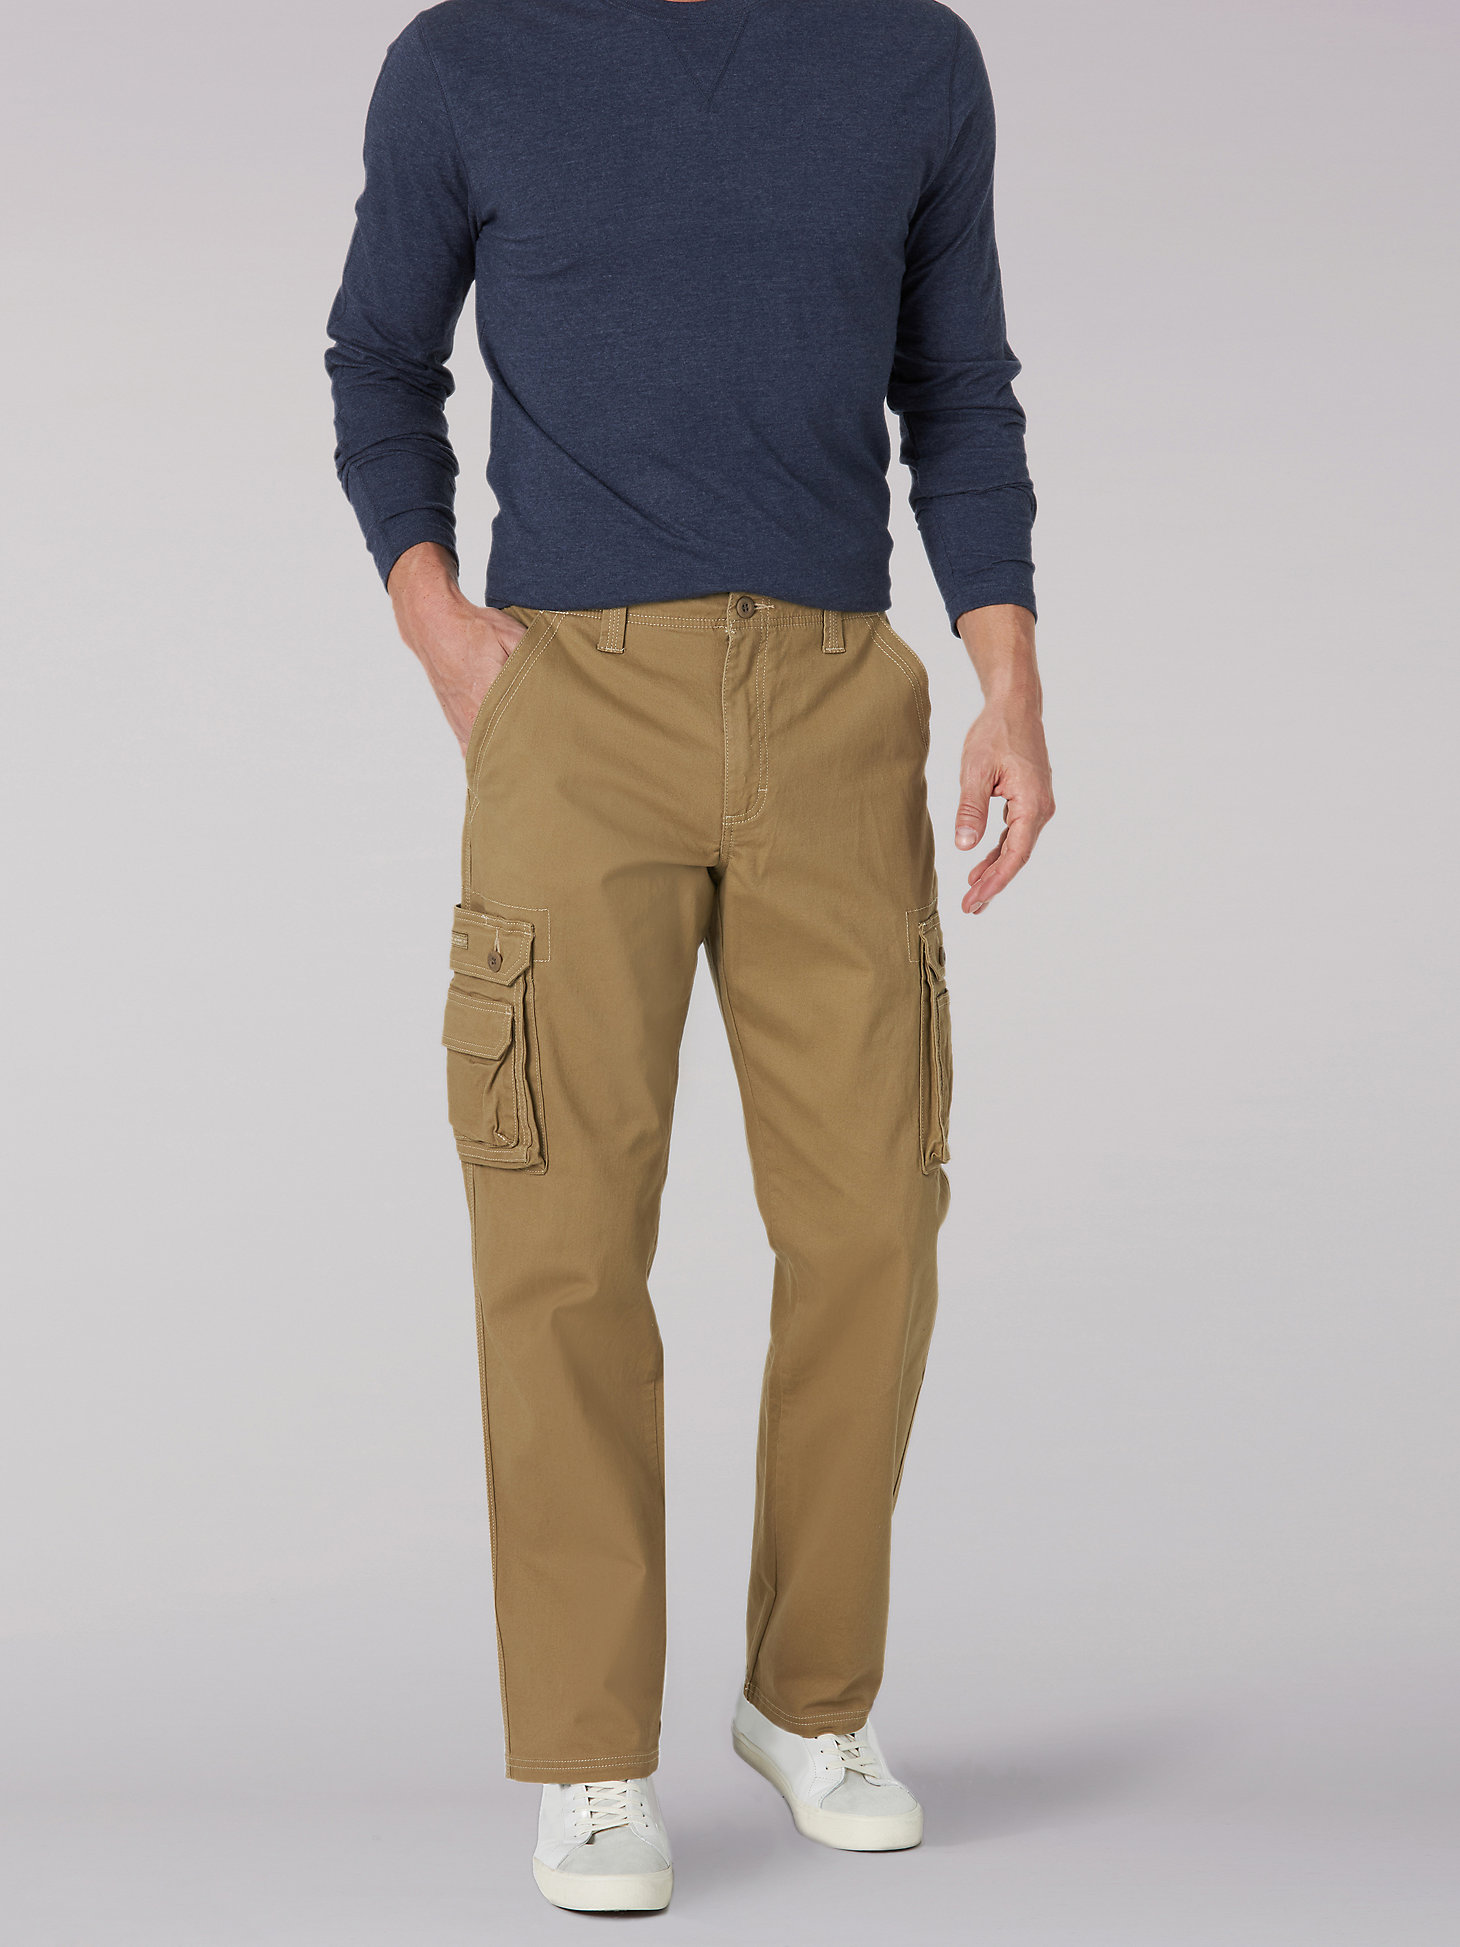 Men's Wyoming Relaxed Fit Cargo Twill Pant in Nomad main view